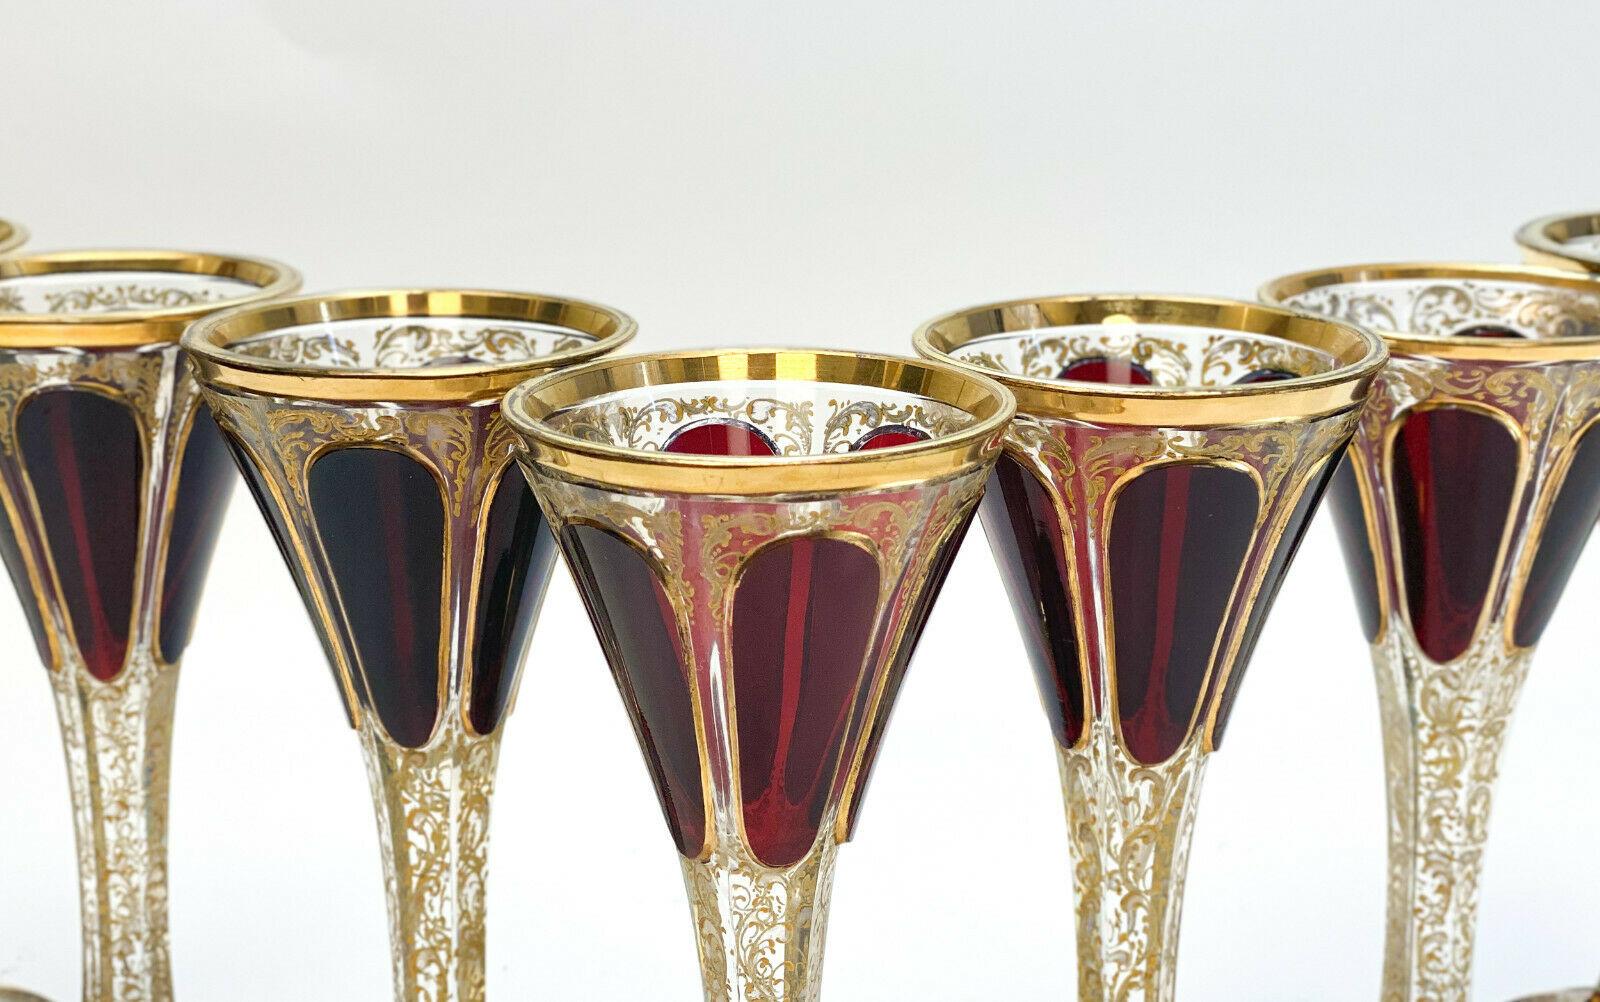 7 Moser cabochon & raised gilt garnet red to clear claret wine goblets, circa 1900. Gilt foliate scroll and beaded designs throughout with garnet red cabochon panels throughout the pieces. This is the antique version for which there are now numerous